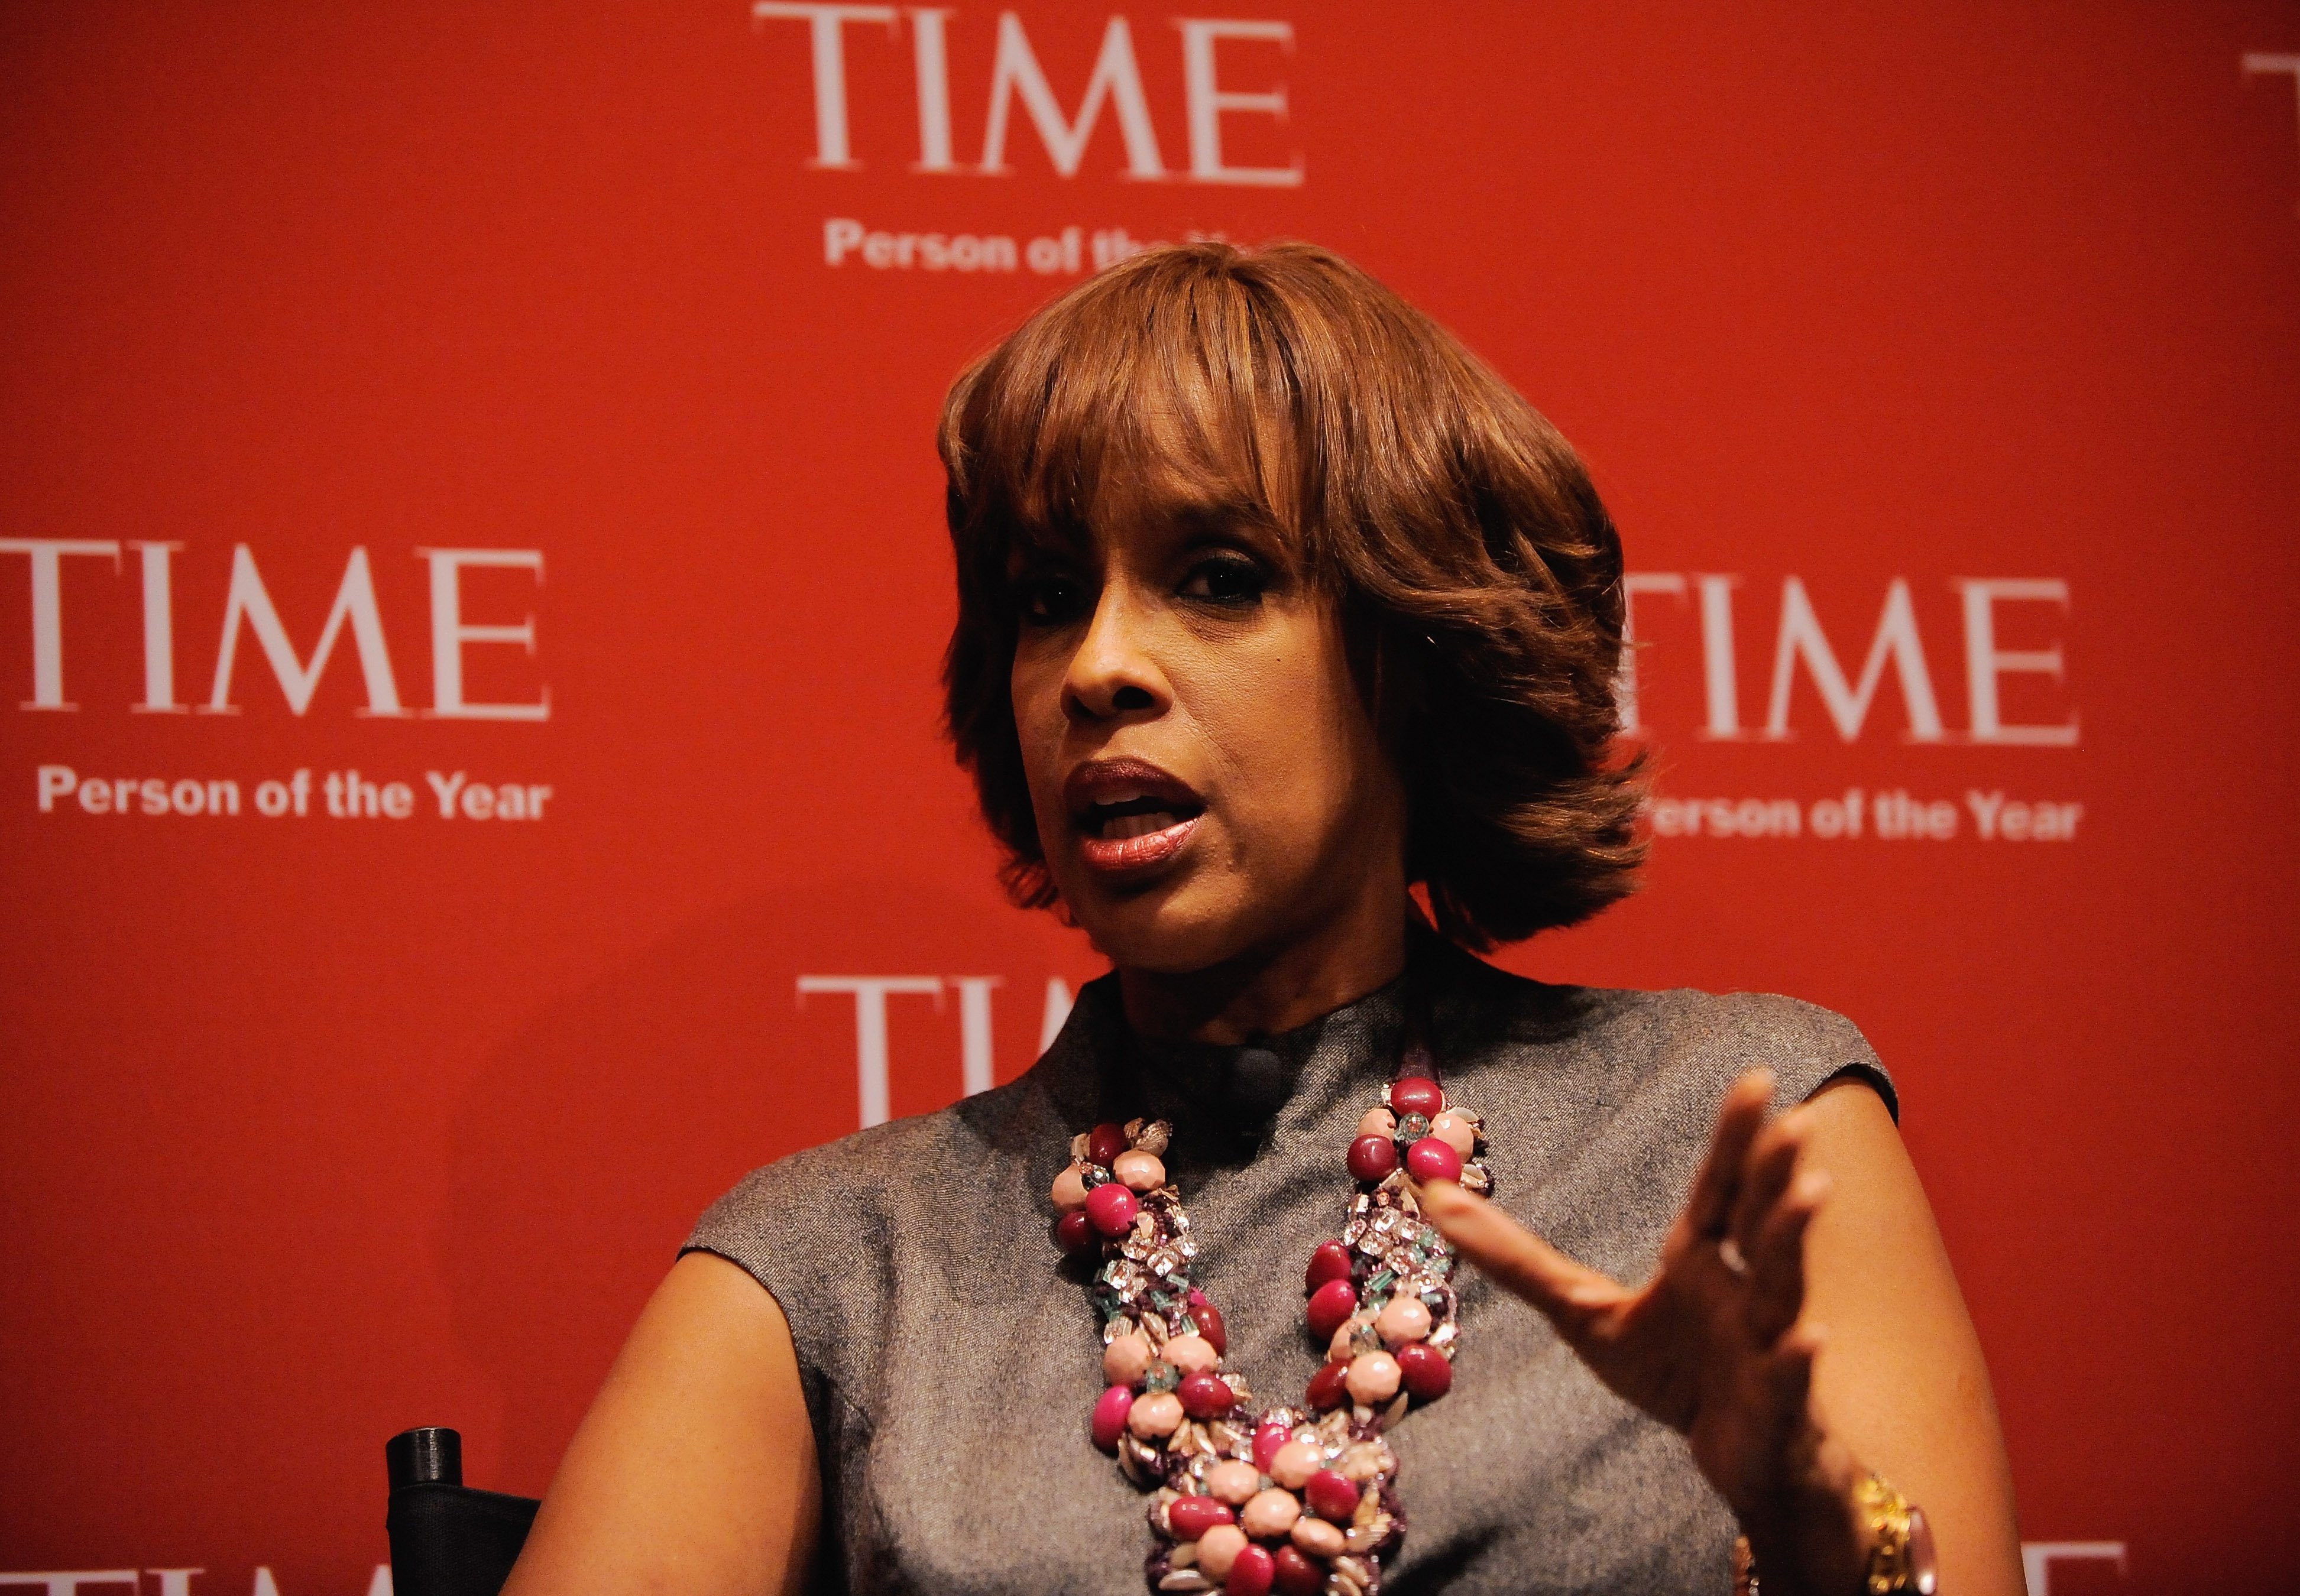 Gayle King at the TIME's 2009 Person of the Year on Nov. 12, 2009 in New York City | Photo: Getty Images